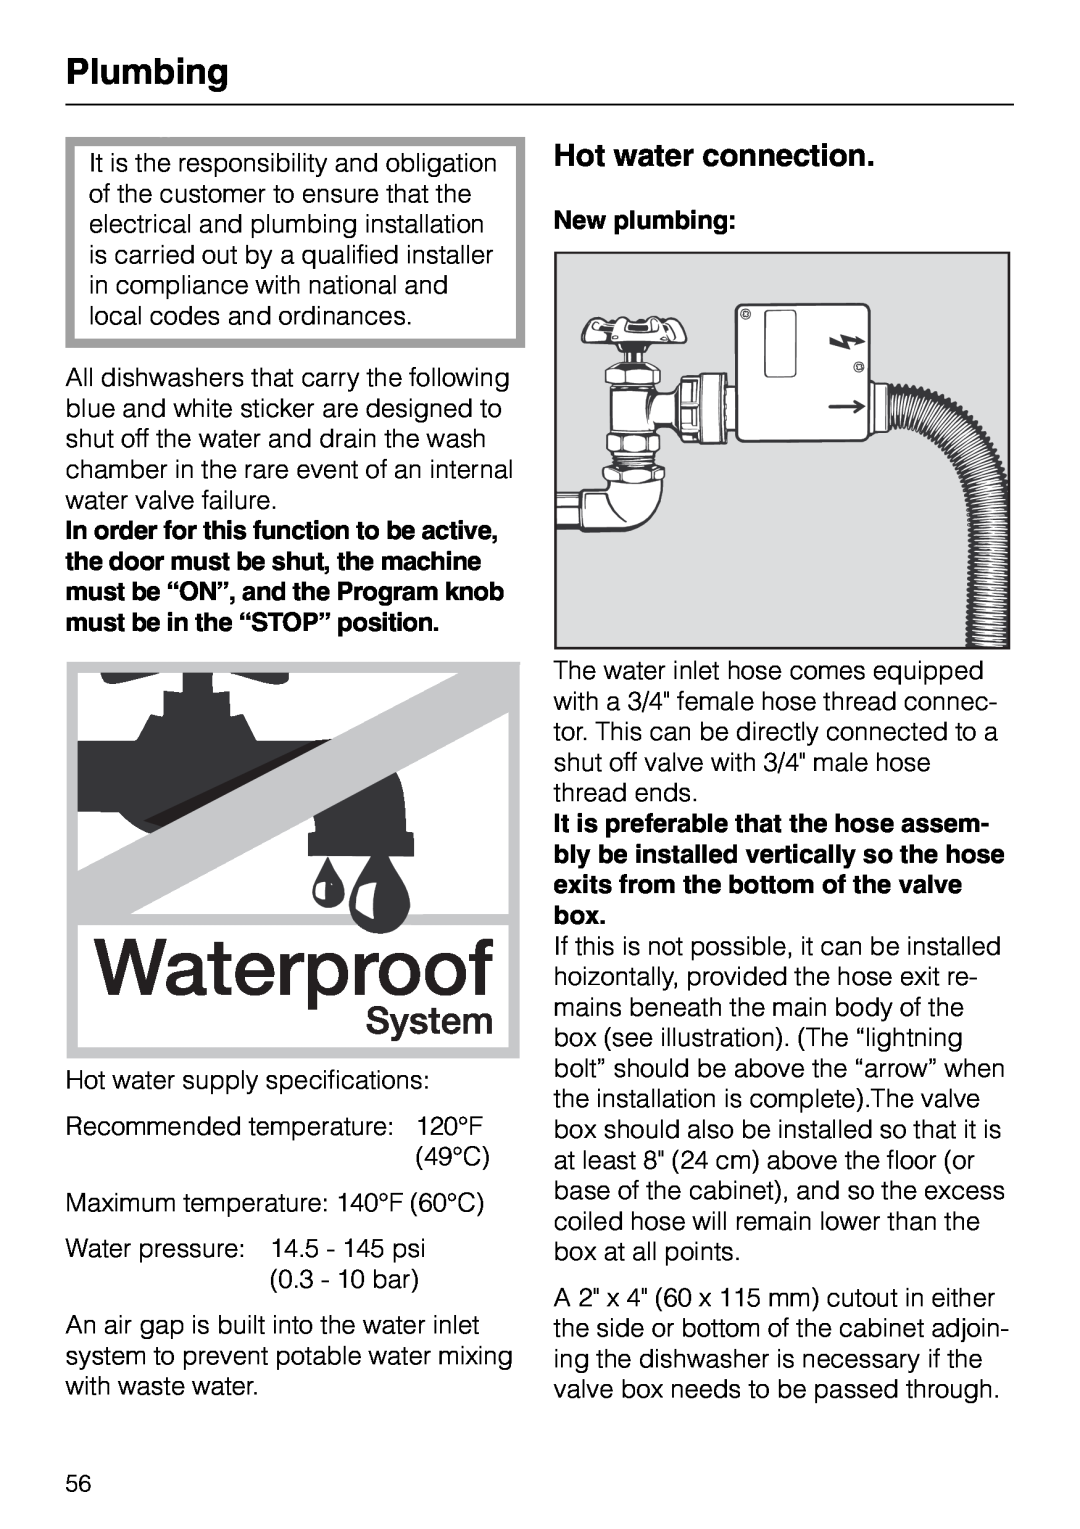 Miele M.-NR. 04 390 922 operating instructions Plumbing, Hot water connection, New plumbing 